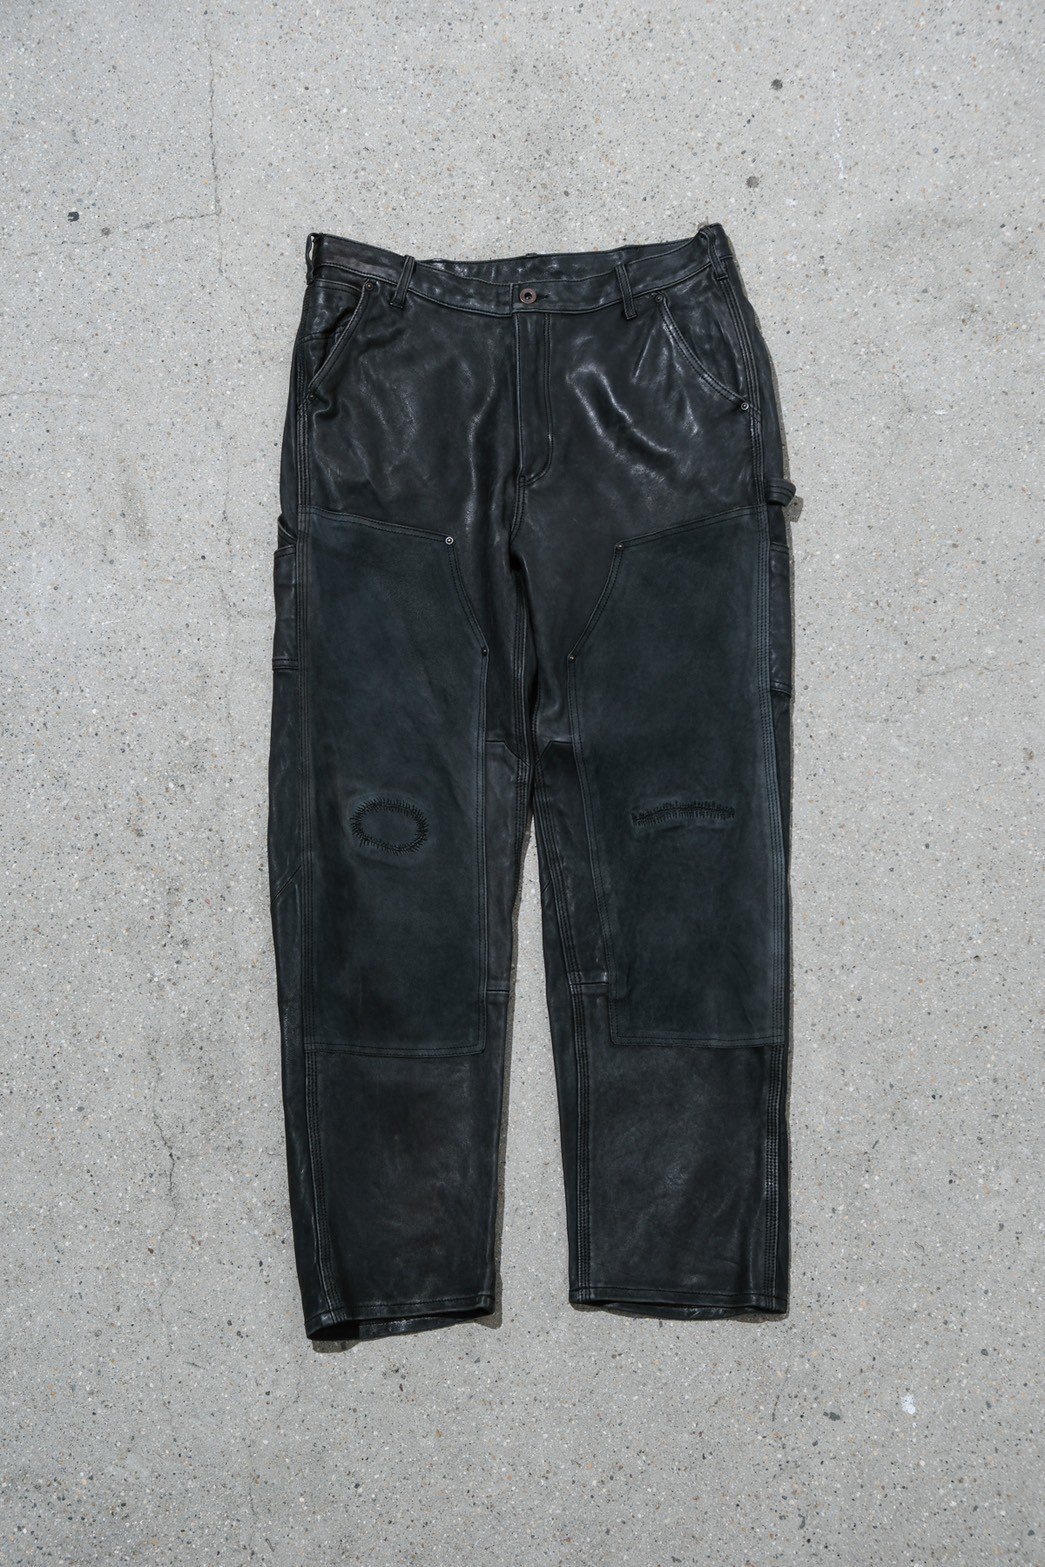 THE CLOTHES WITH NO NAME / Leather Work Pants